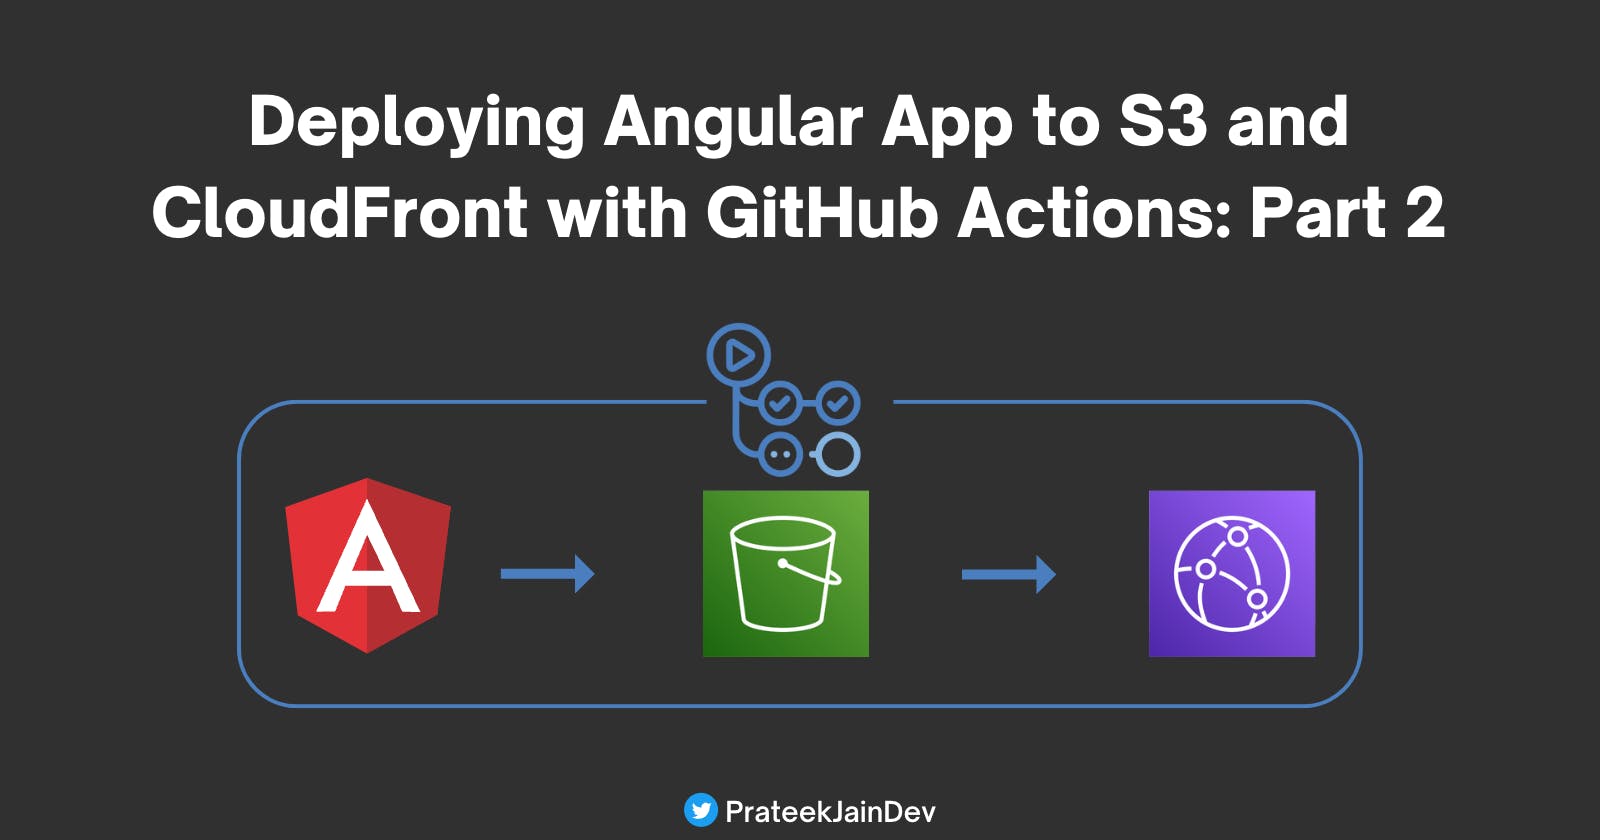 Deploying Angular App to S3 and CloudFront with GitHub Actions: Part 2